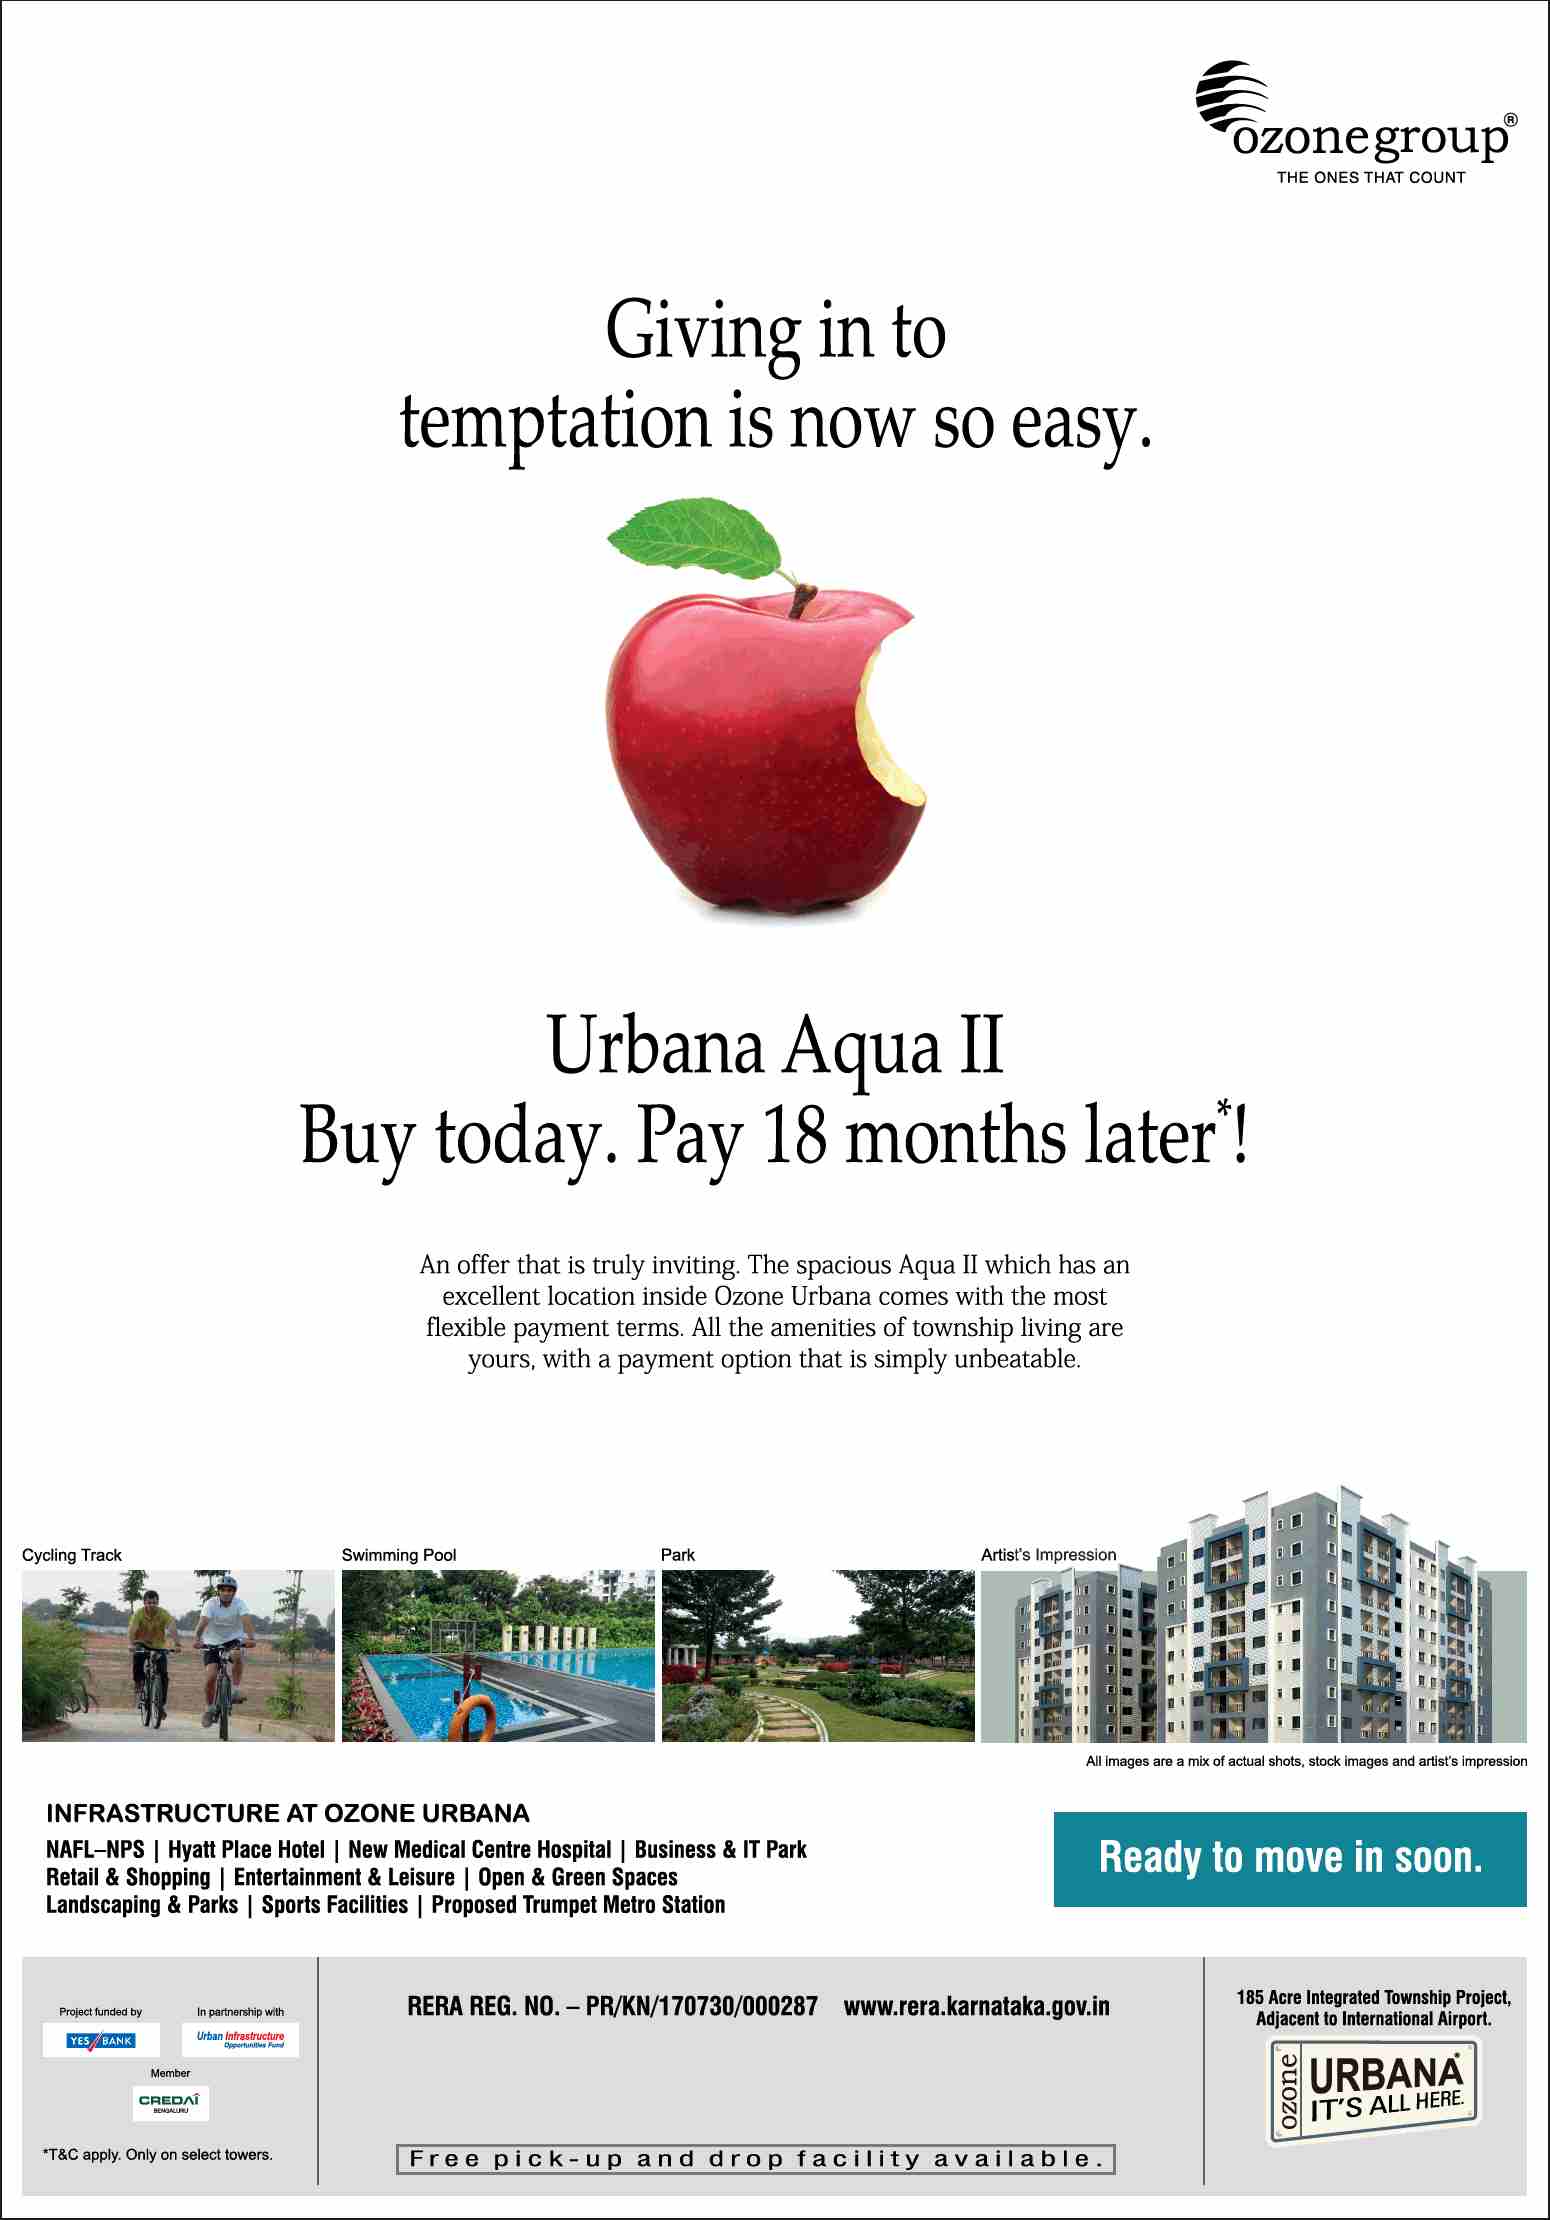 Buy today & pay 18 months later at Ozone Urbana Aqua 2 in Bangalore Update